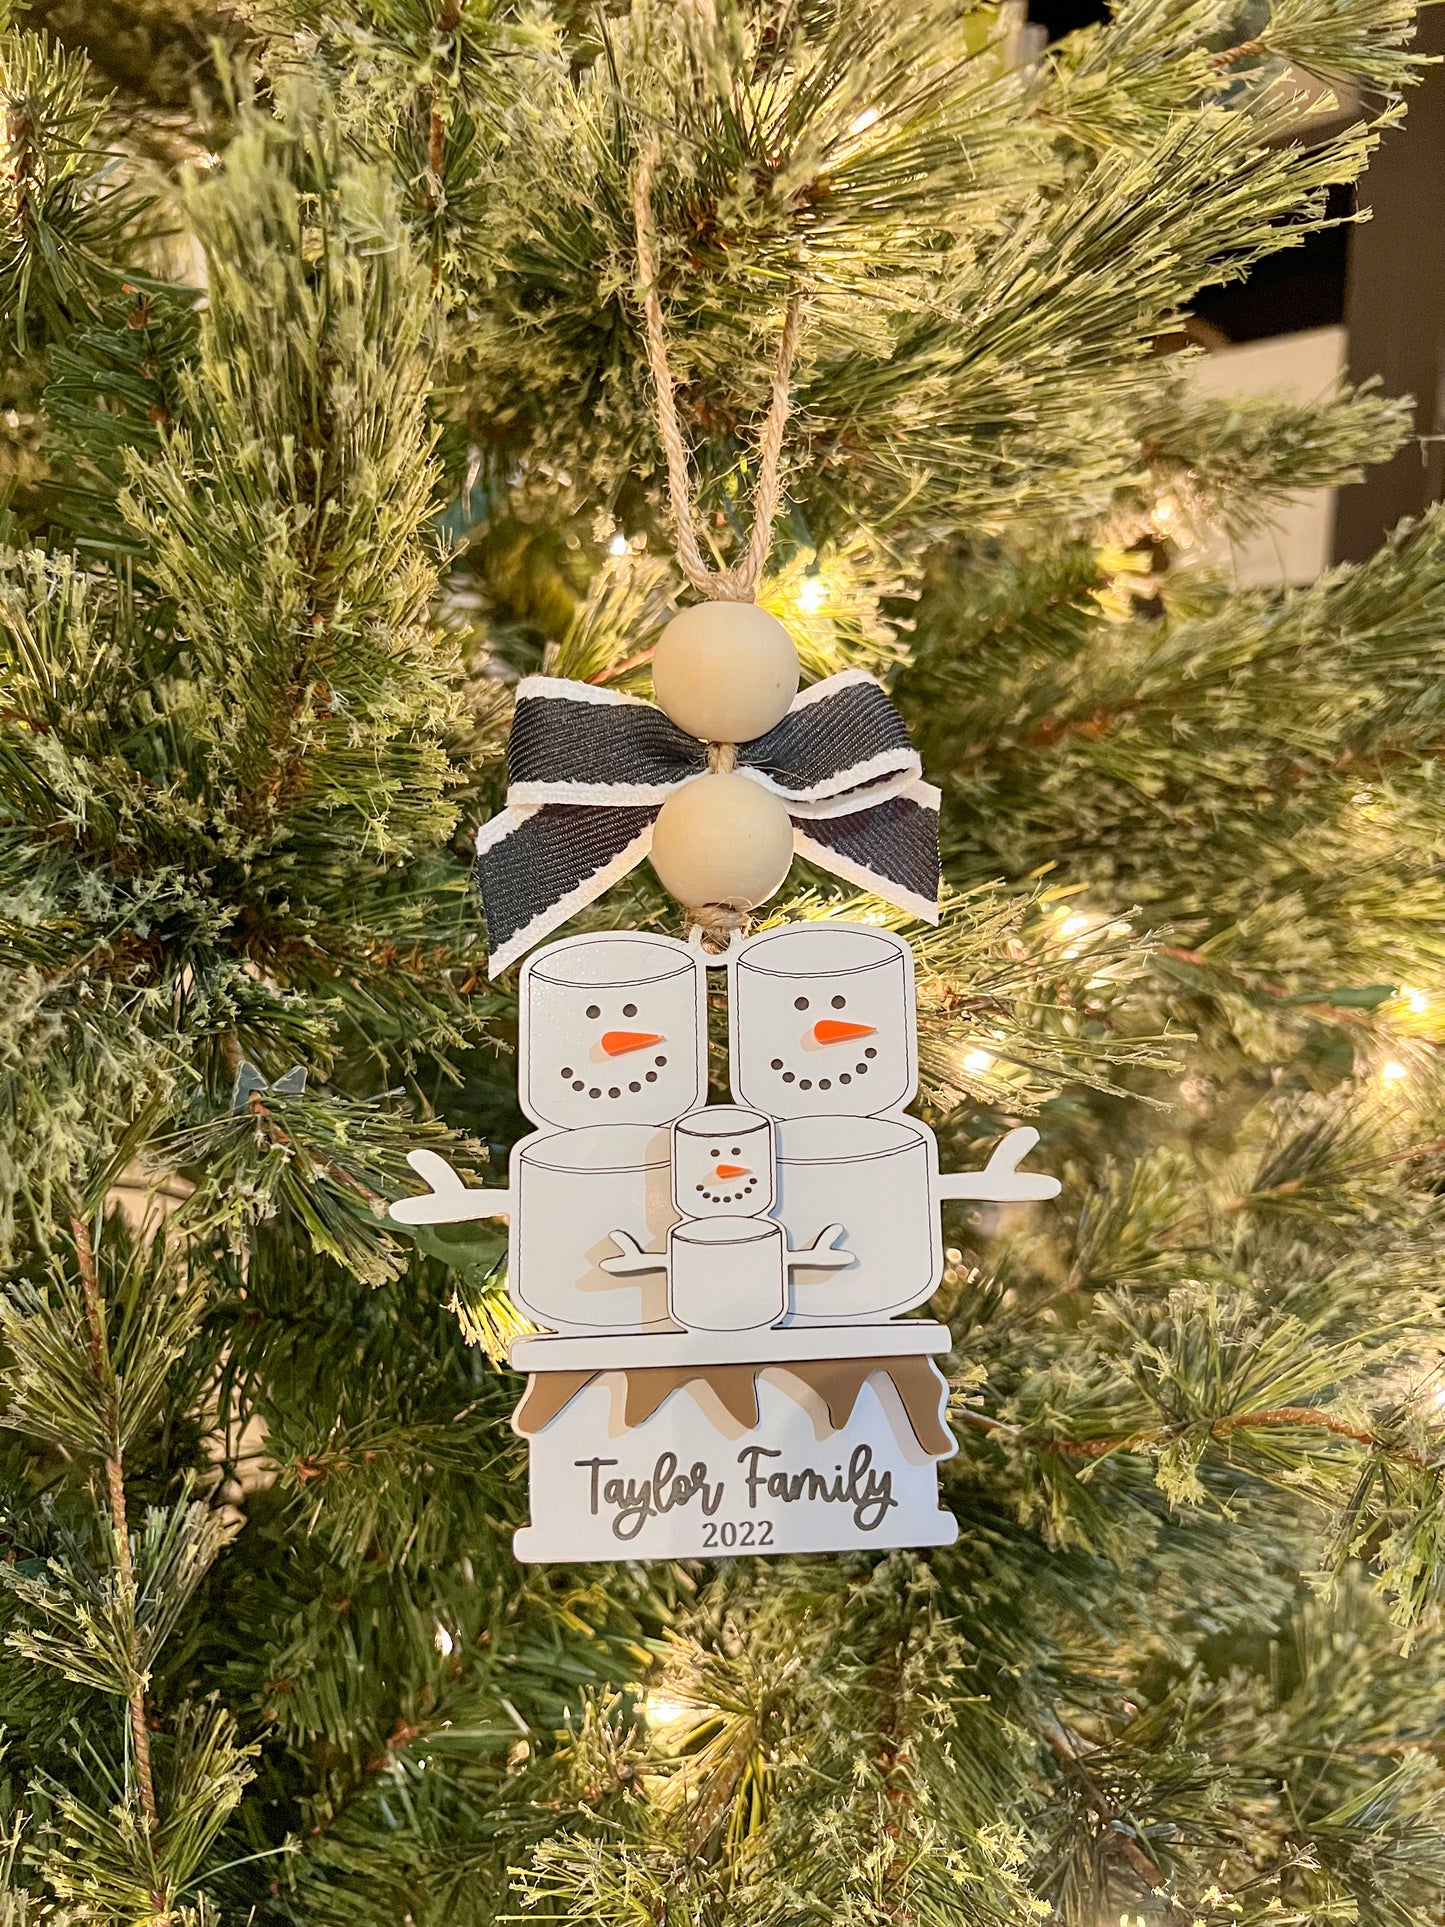 S’mores Family Ornament - Family Ornament